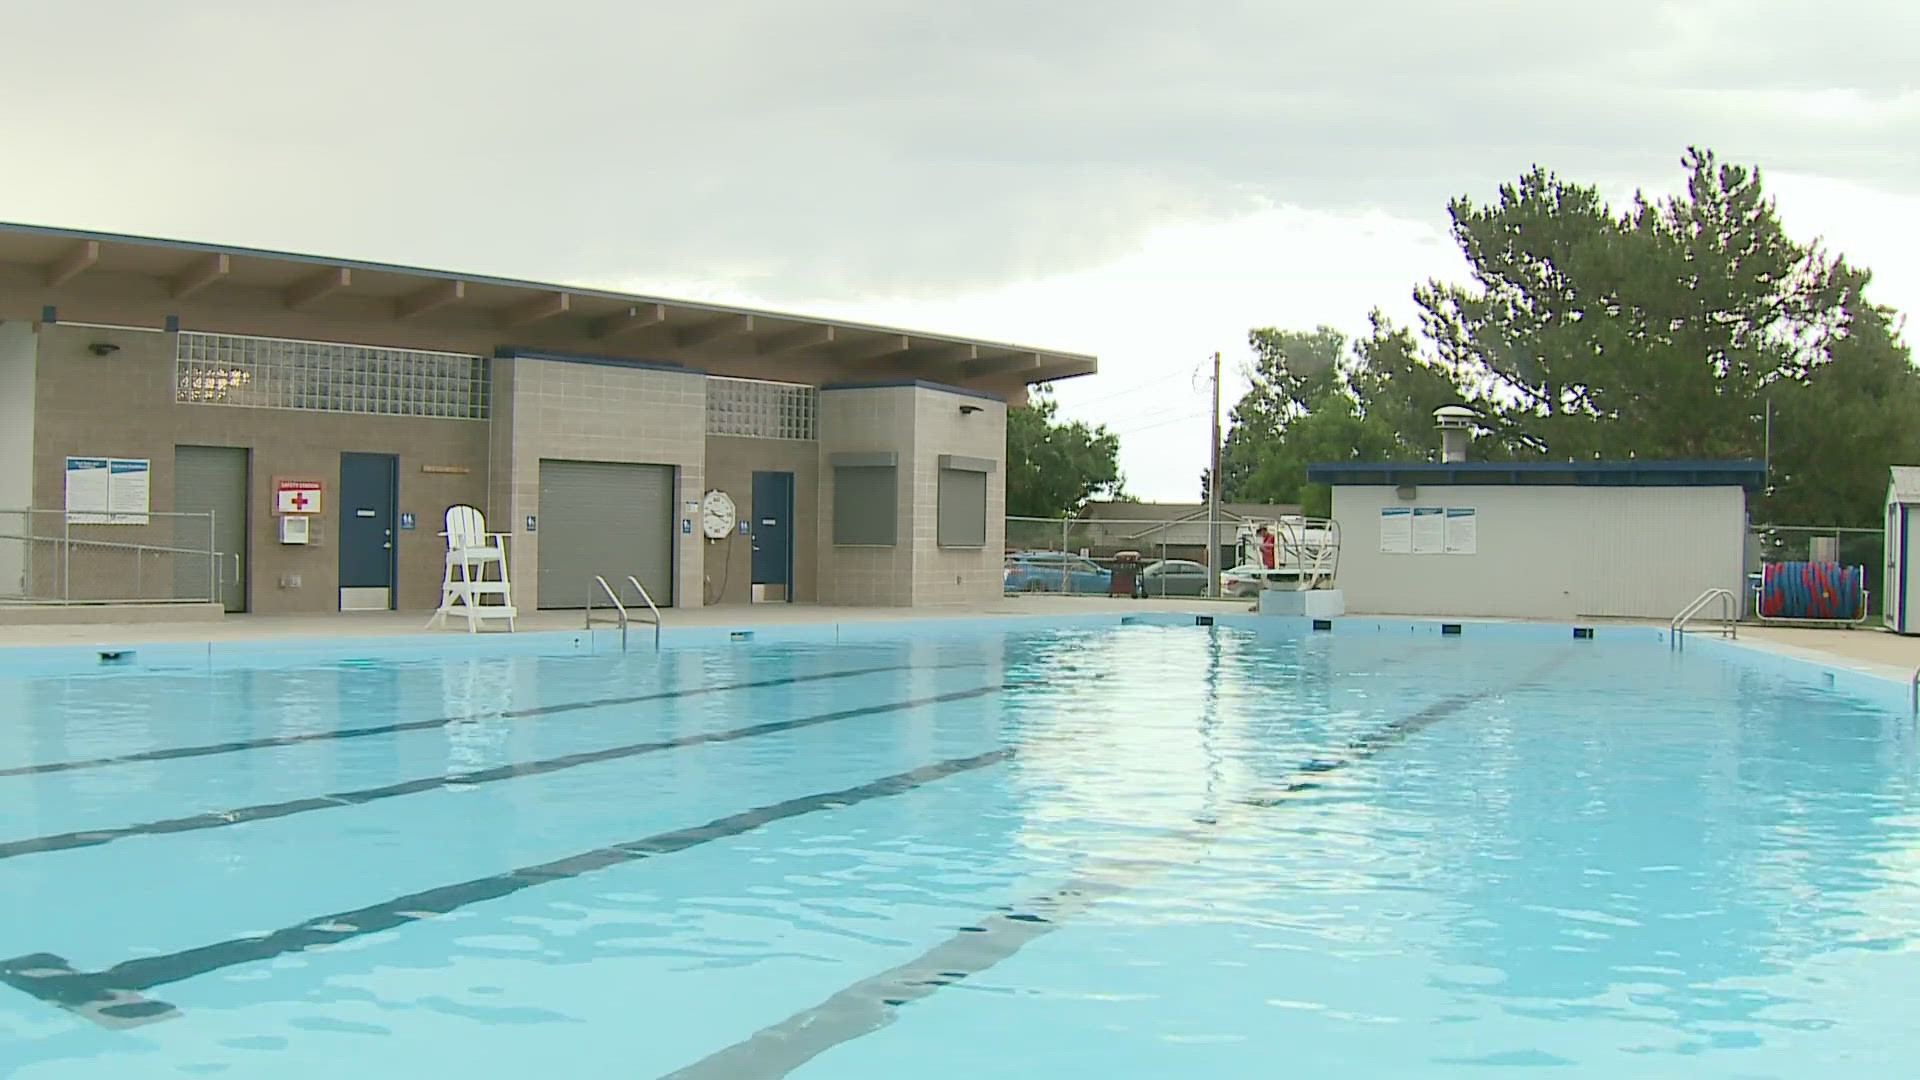 Rec centers across the state are in need of lifeguards. Some are only able to keep their pools open a few days a week due to a lifeguard shortage.